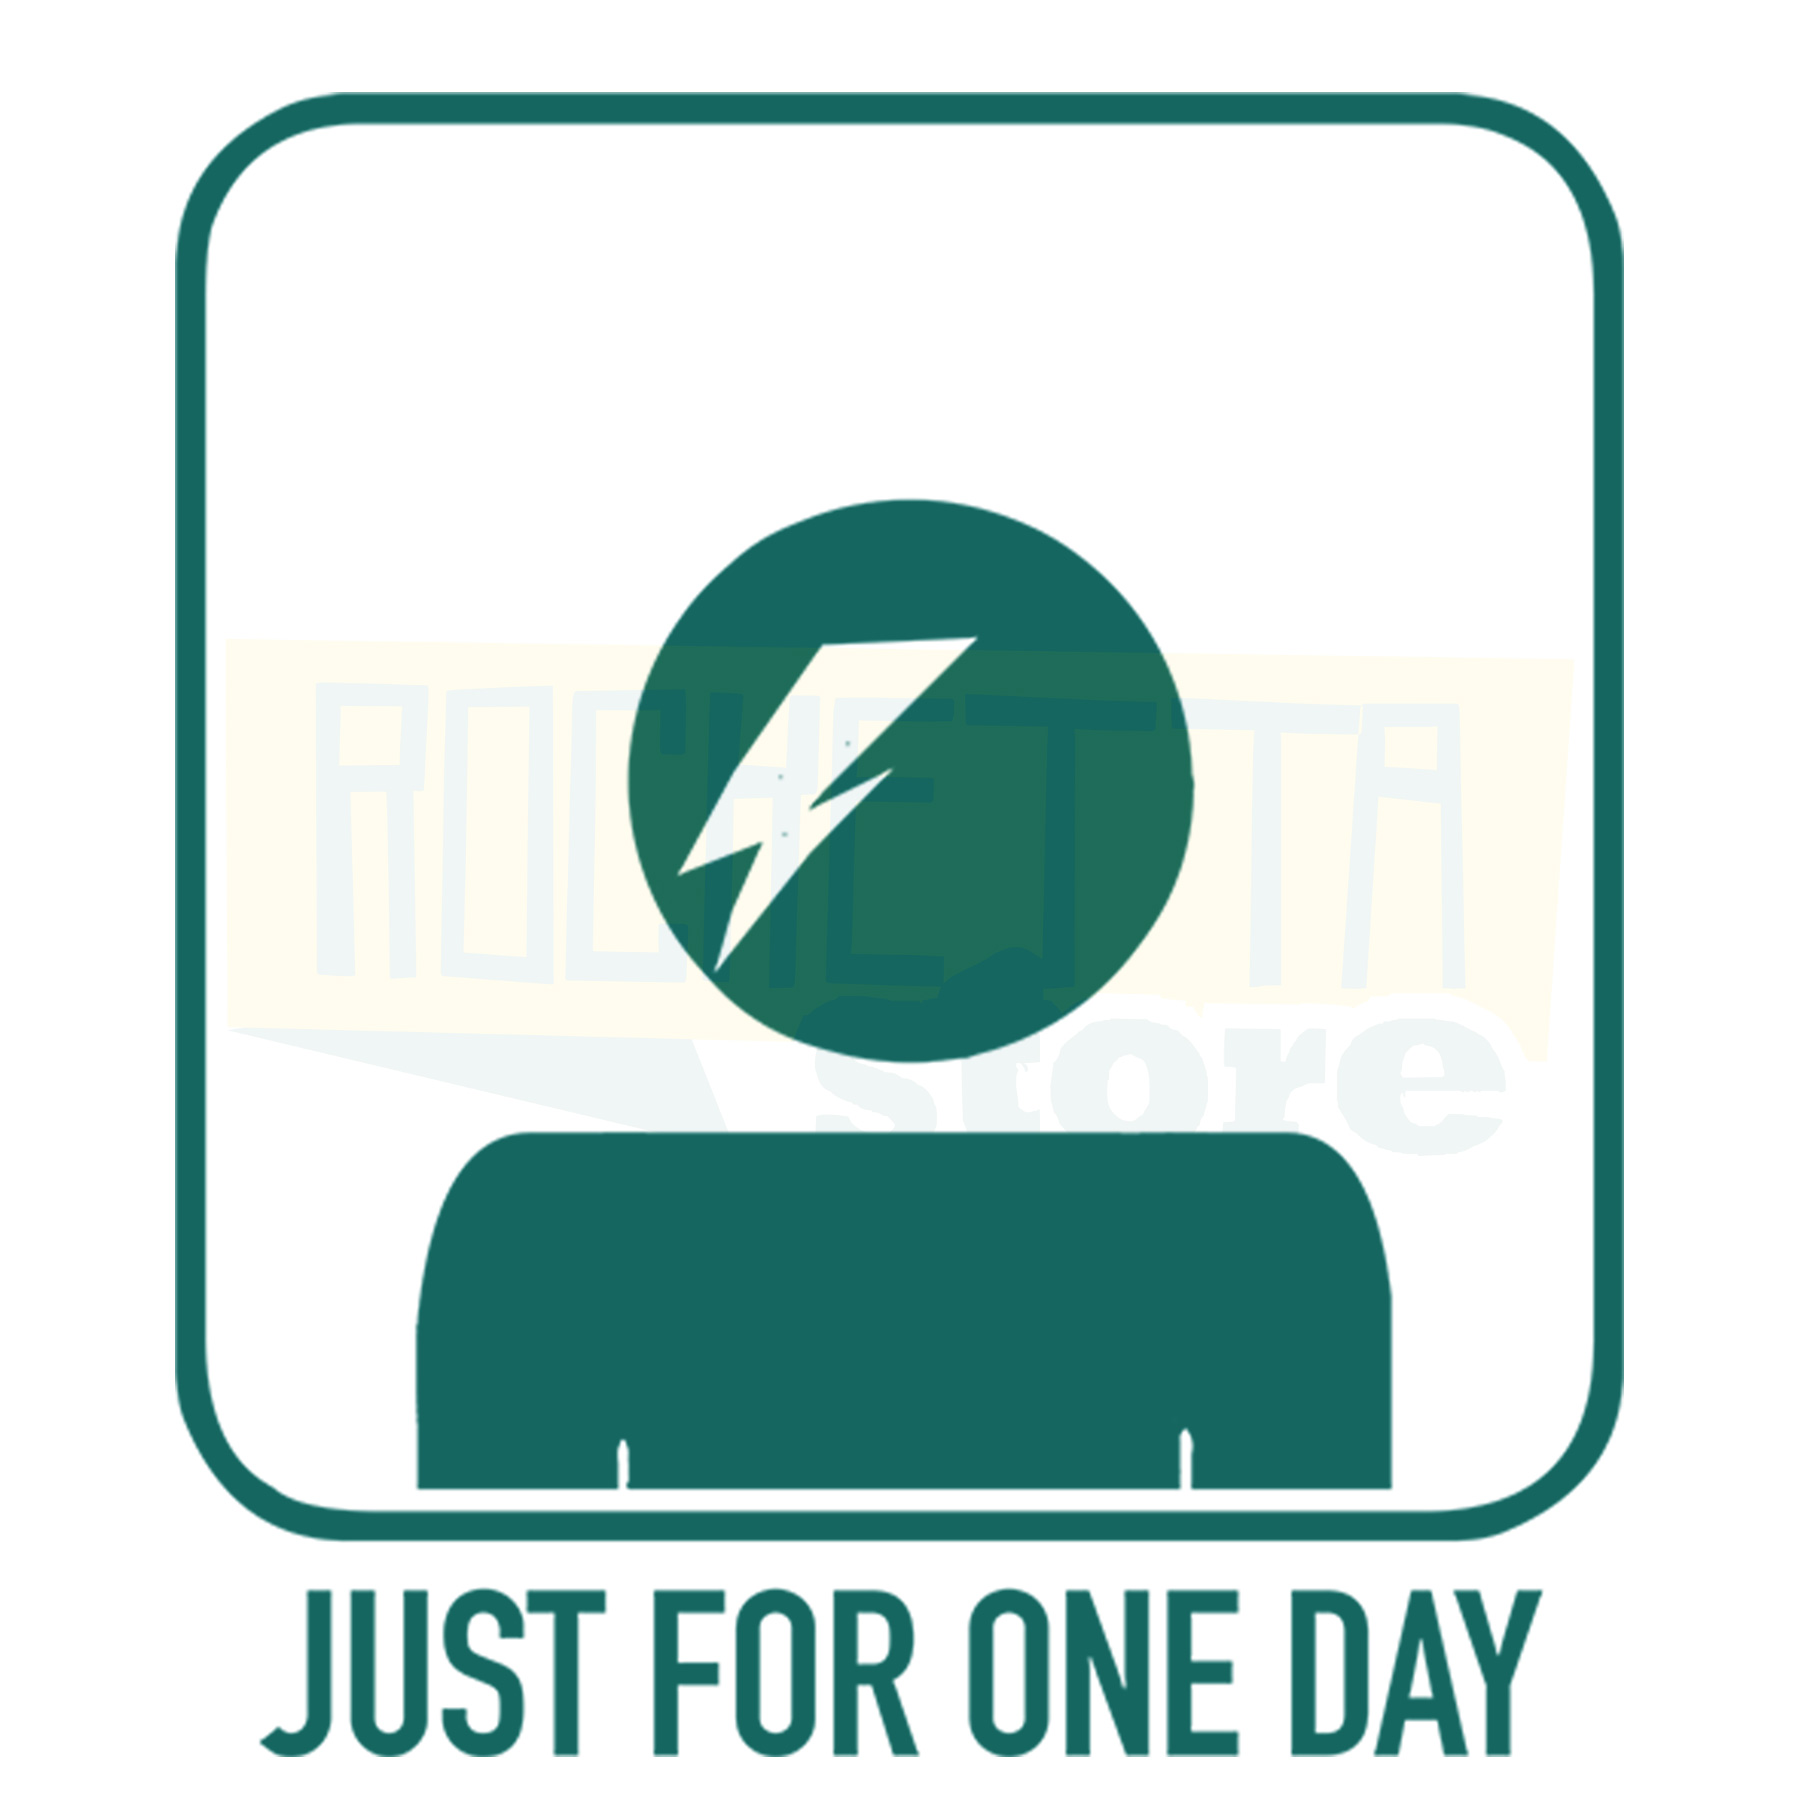 DAY ONE FOR JUST Store ⋆ Rocketta